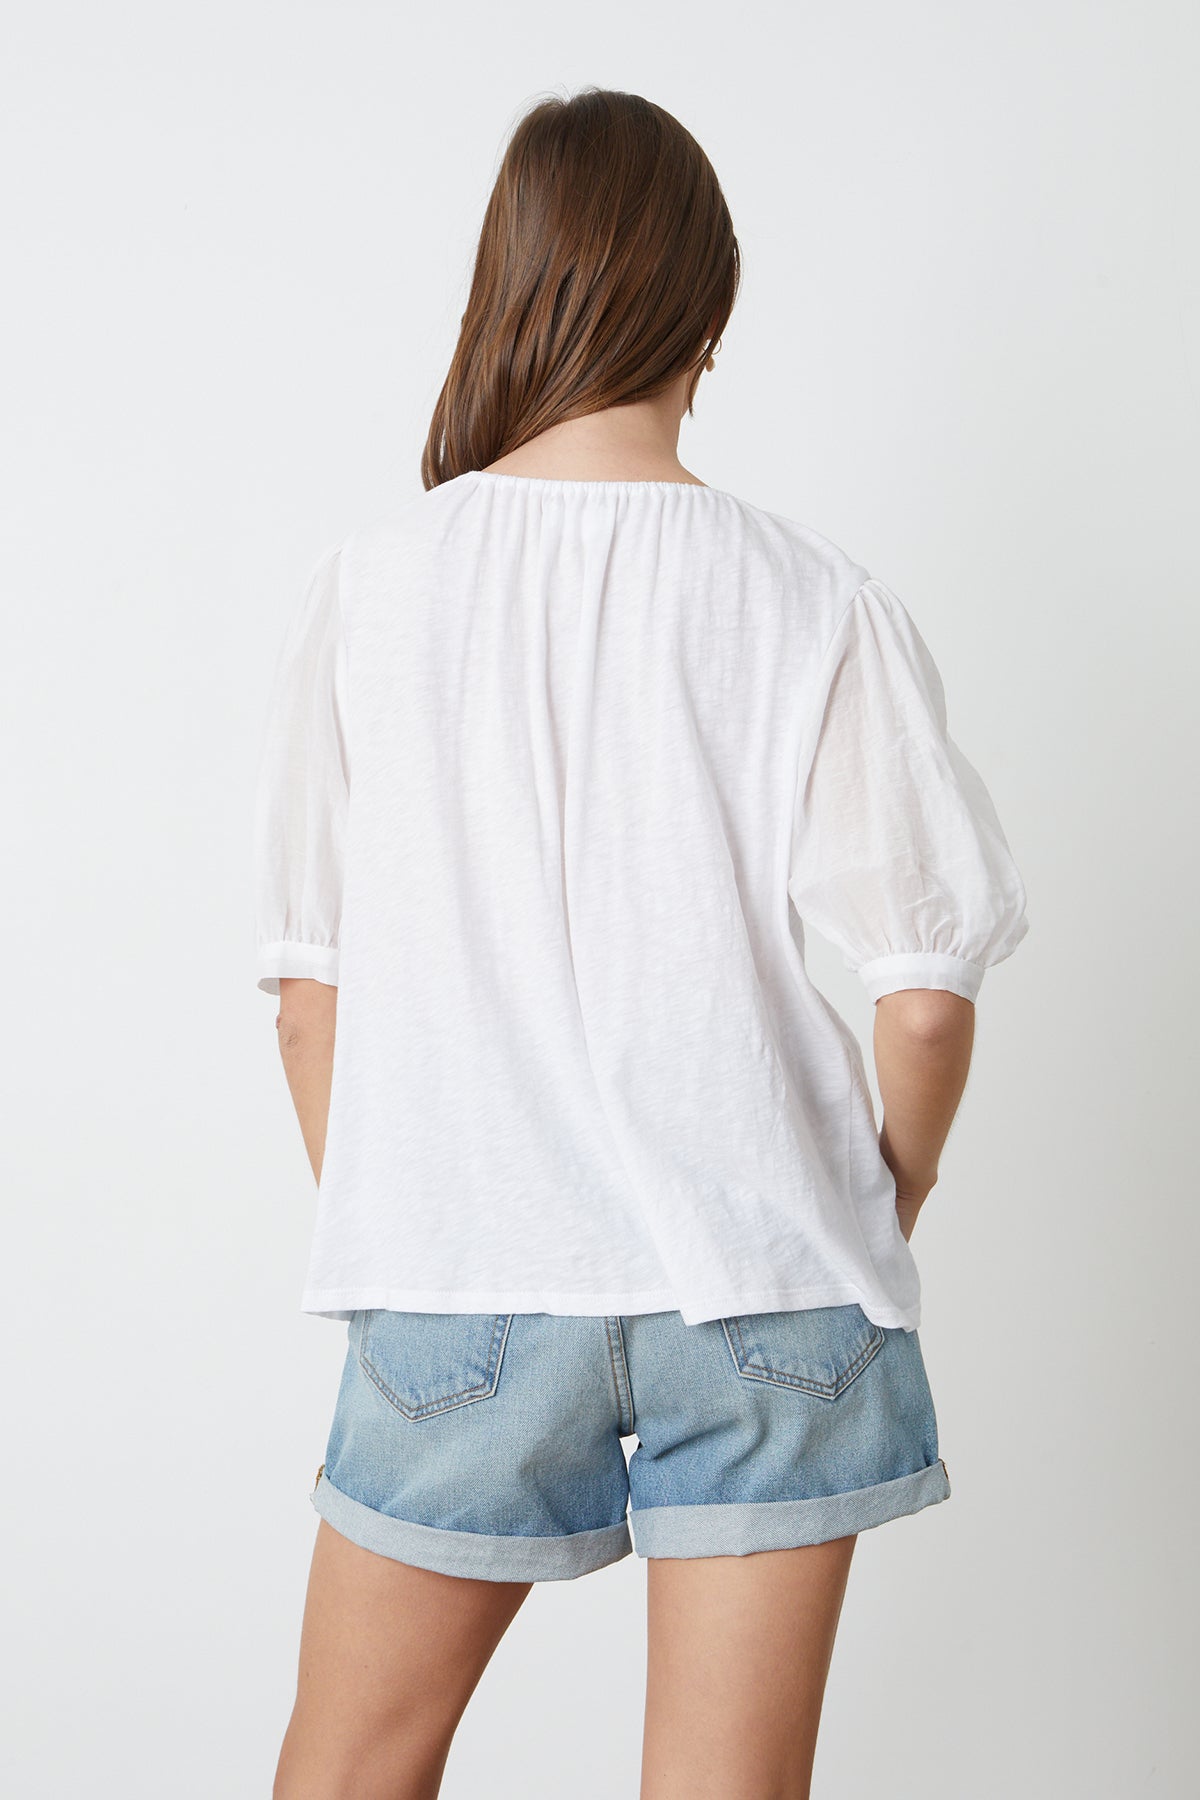   Mallory Top in white with puff sleeves paired with blue denim shorts back 